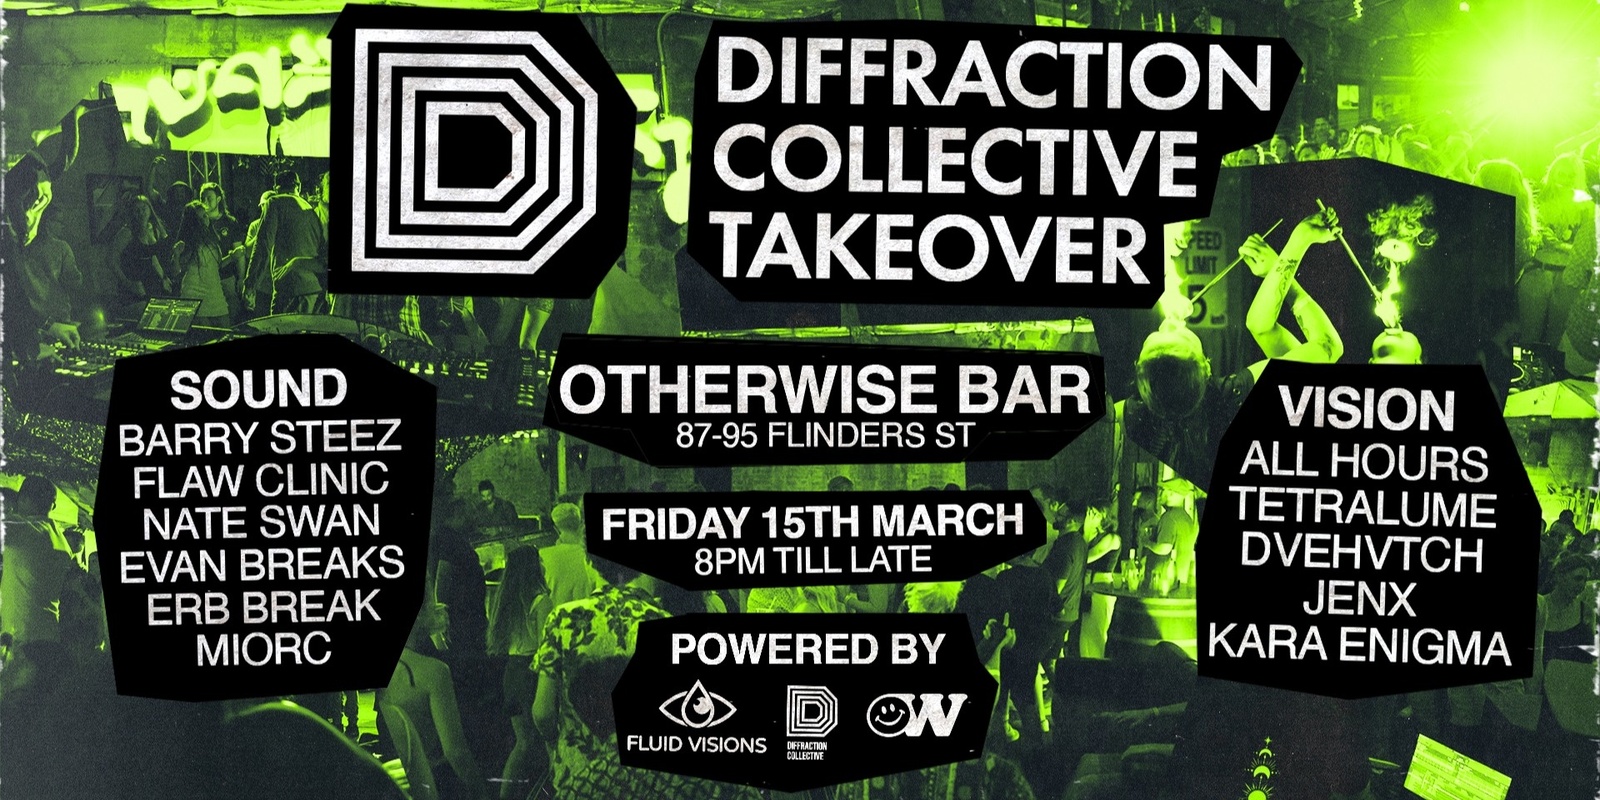 Banner image for DIFFRACTION COLLECTIVE TAKEOVER